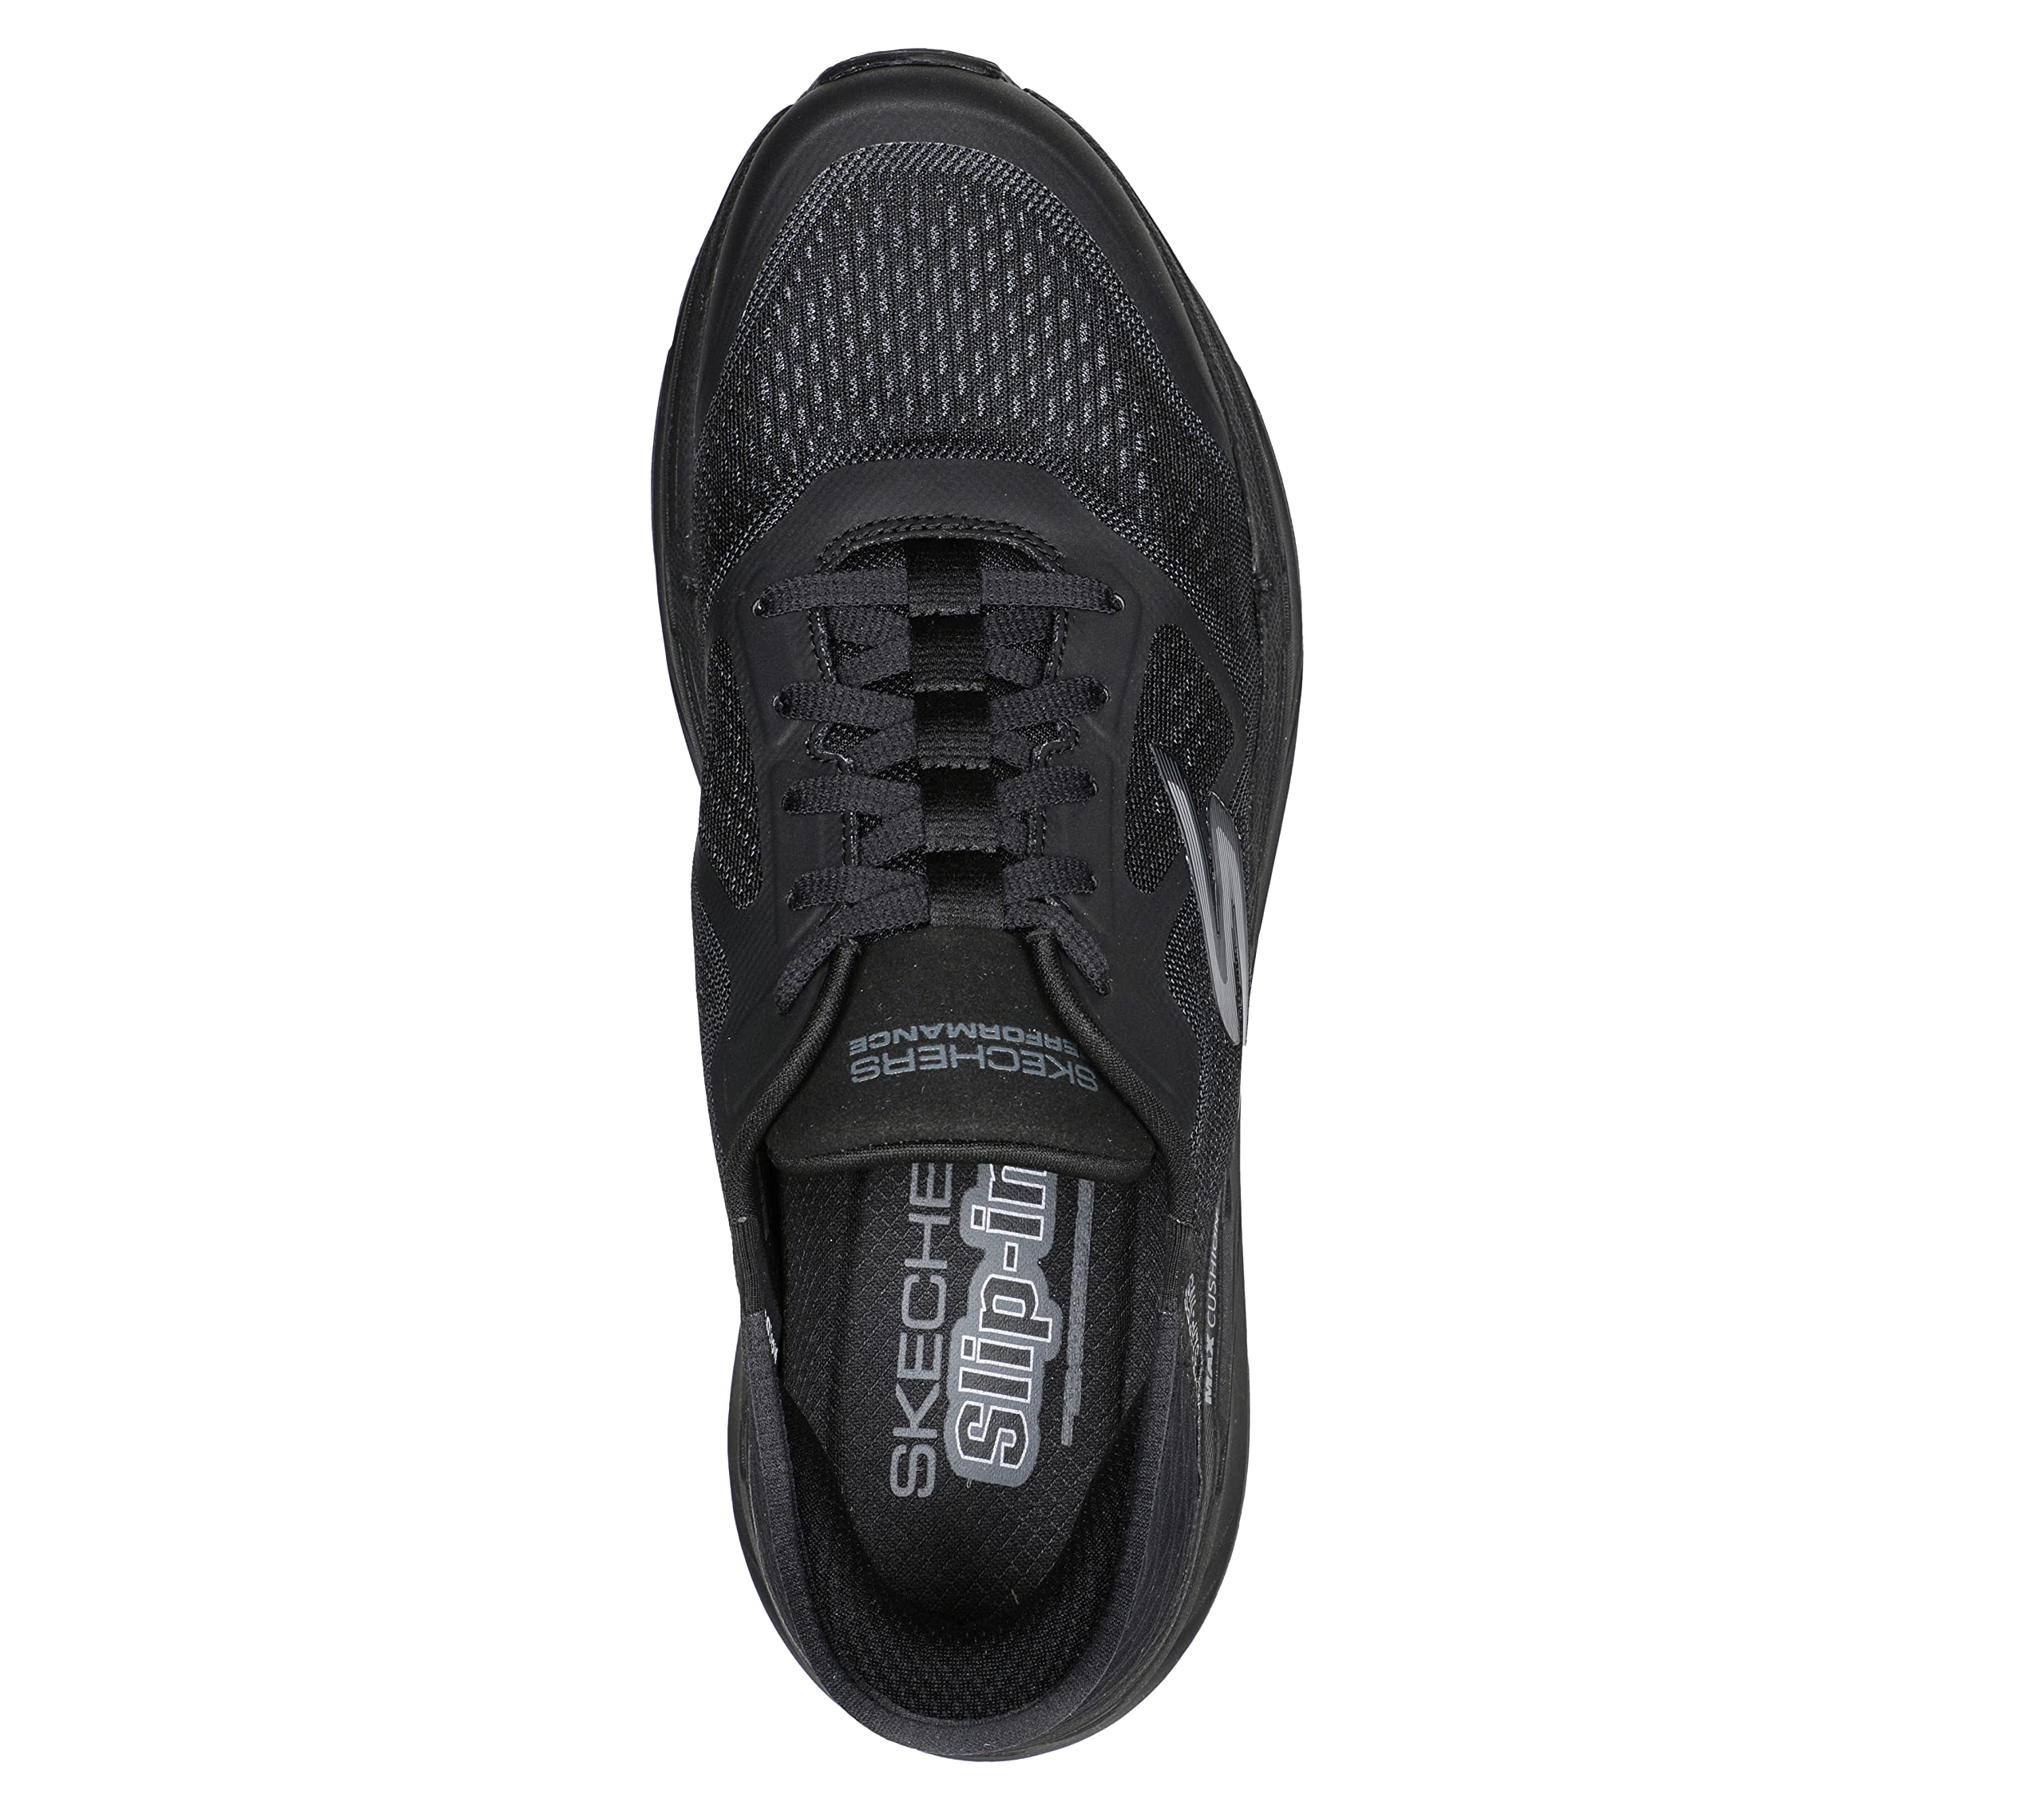 Skechers Men's Max Cushioning Slip-Ins-Athletic Workout Running Walking Shoes with Memory Foam Sneaker, Black, 7 X-Wide